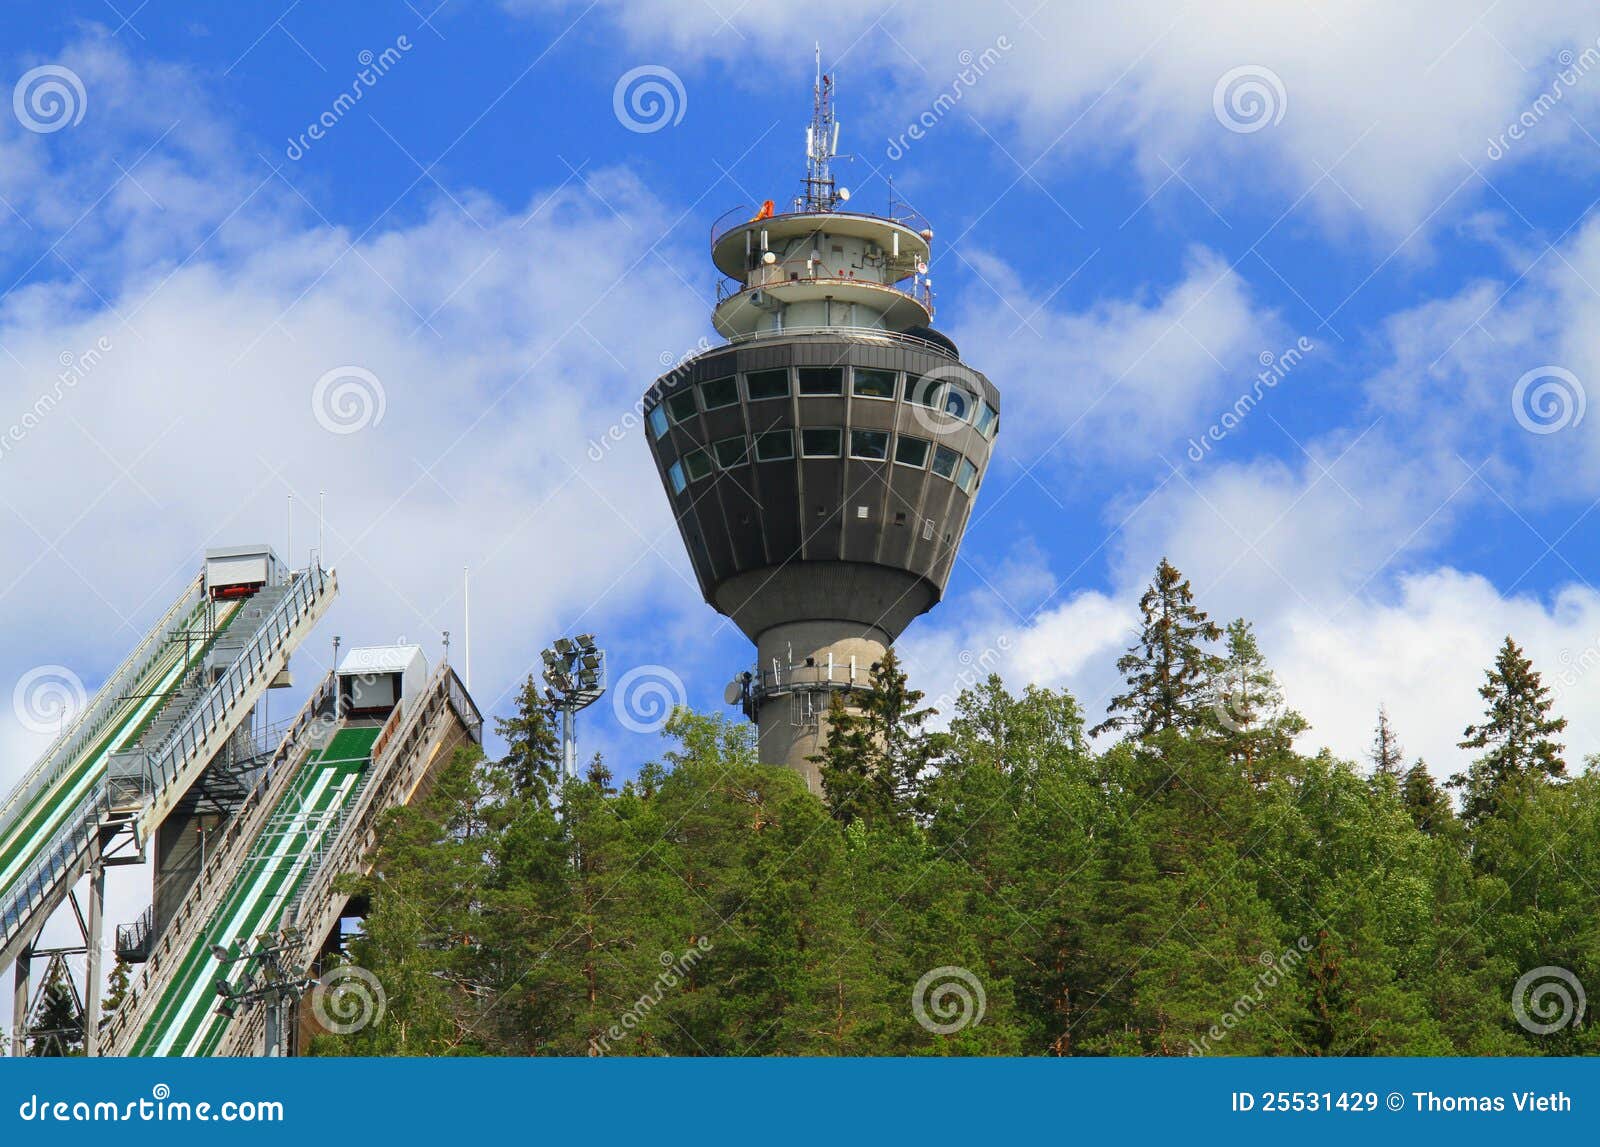 finland/kuopio: transmission and observation tower